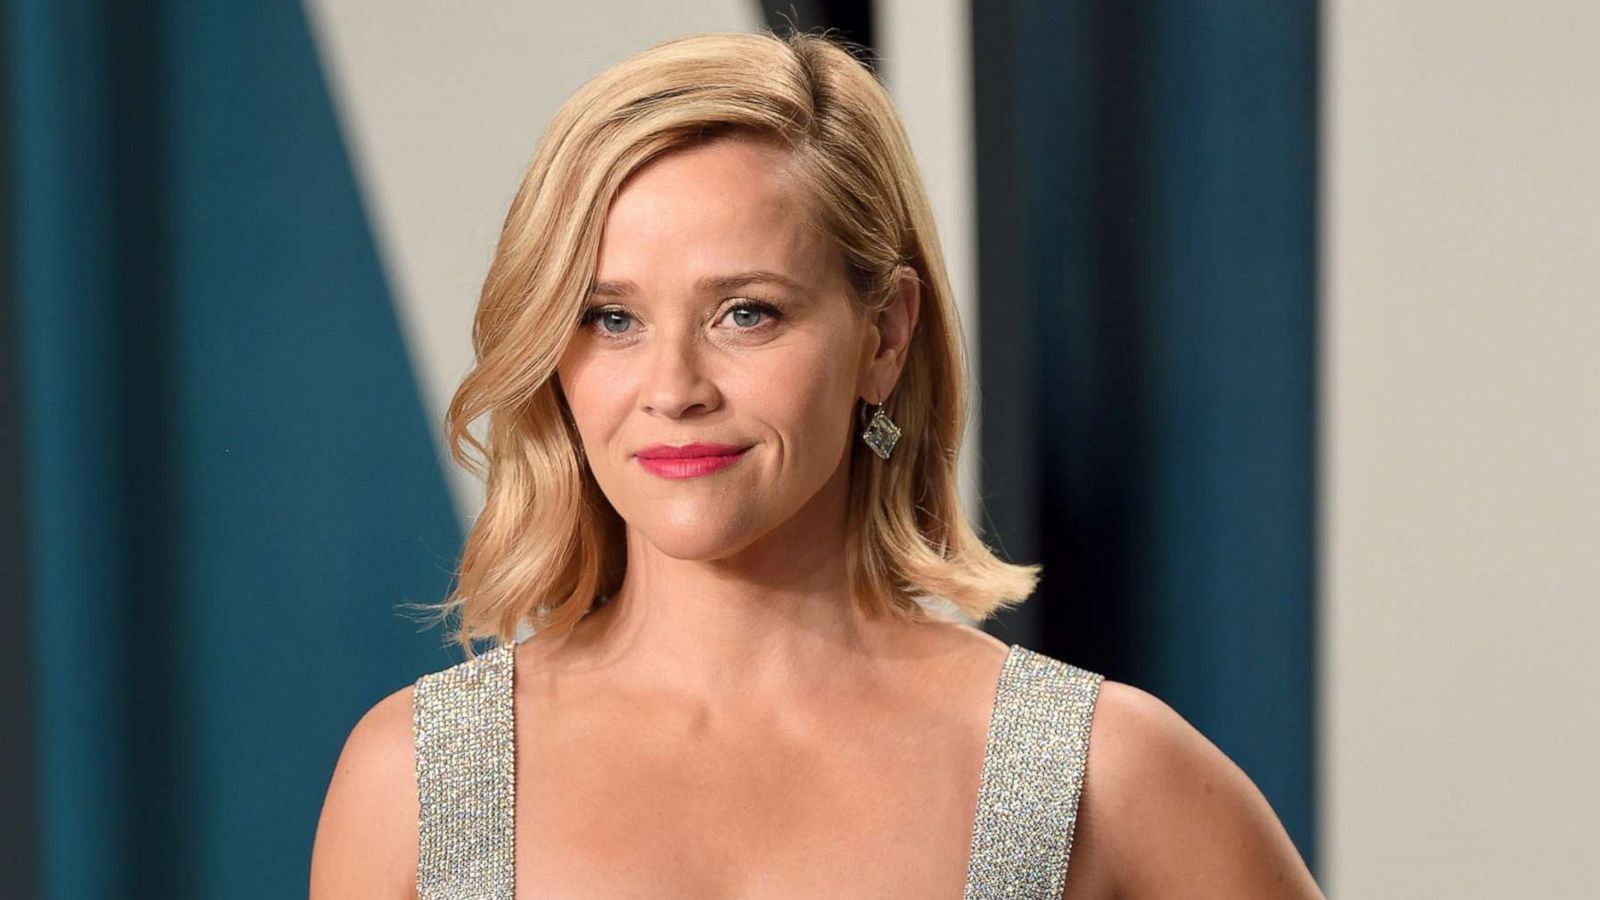 Reese Witherspoon wears a protective face as she steps out with a gift box  amid COVID-19 crisis